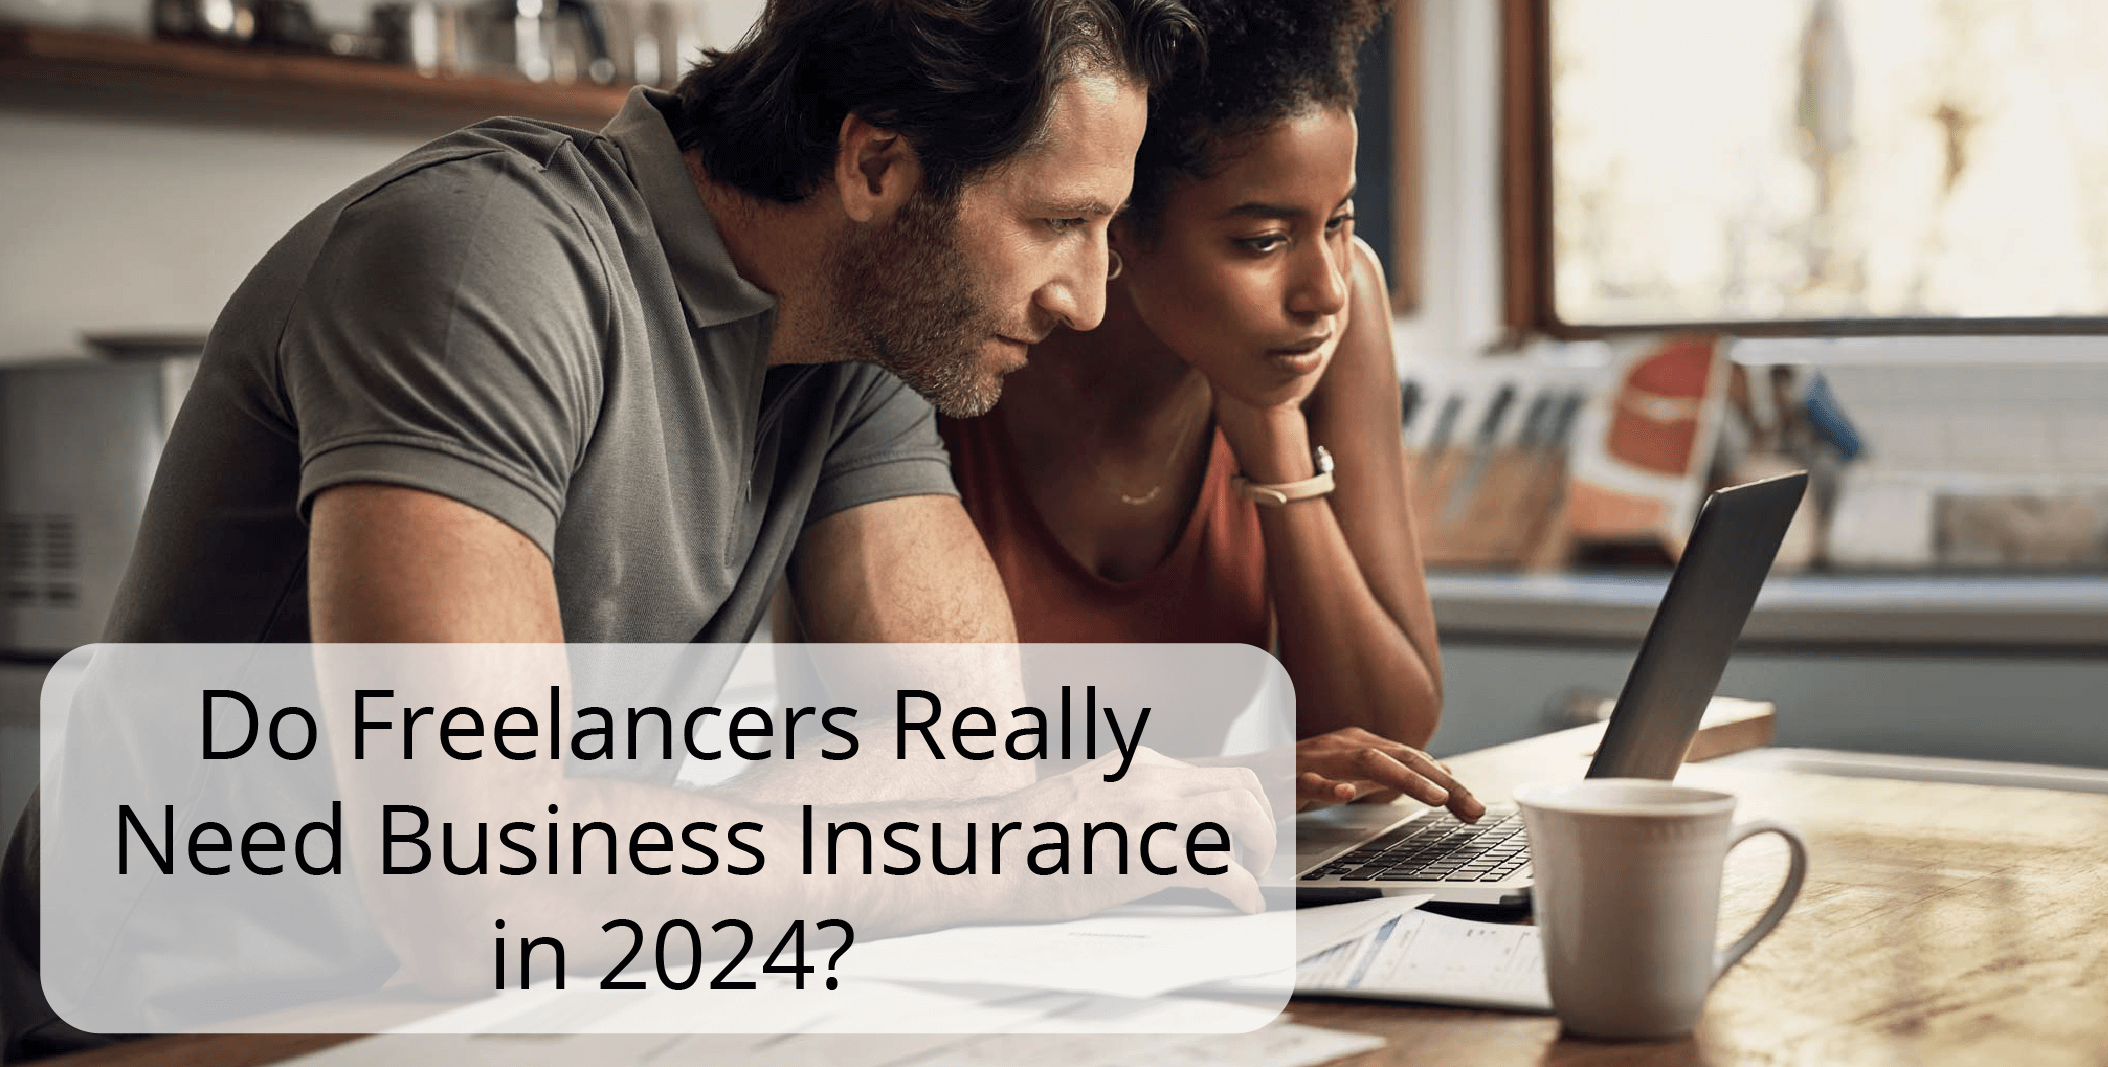 Do Freelancers Really Need Business Insurance in 2024?